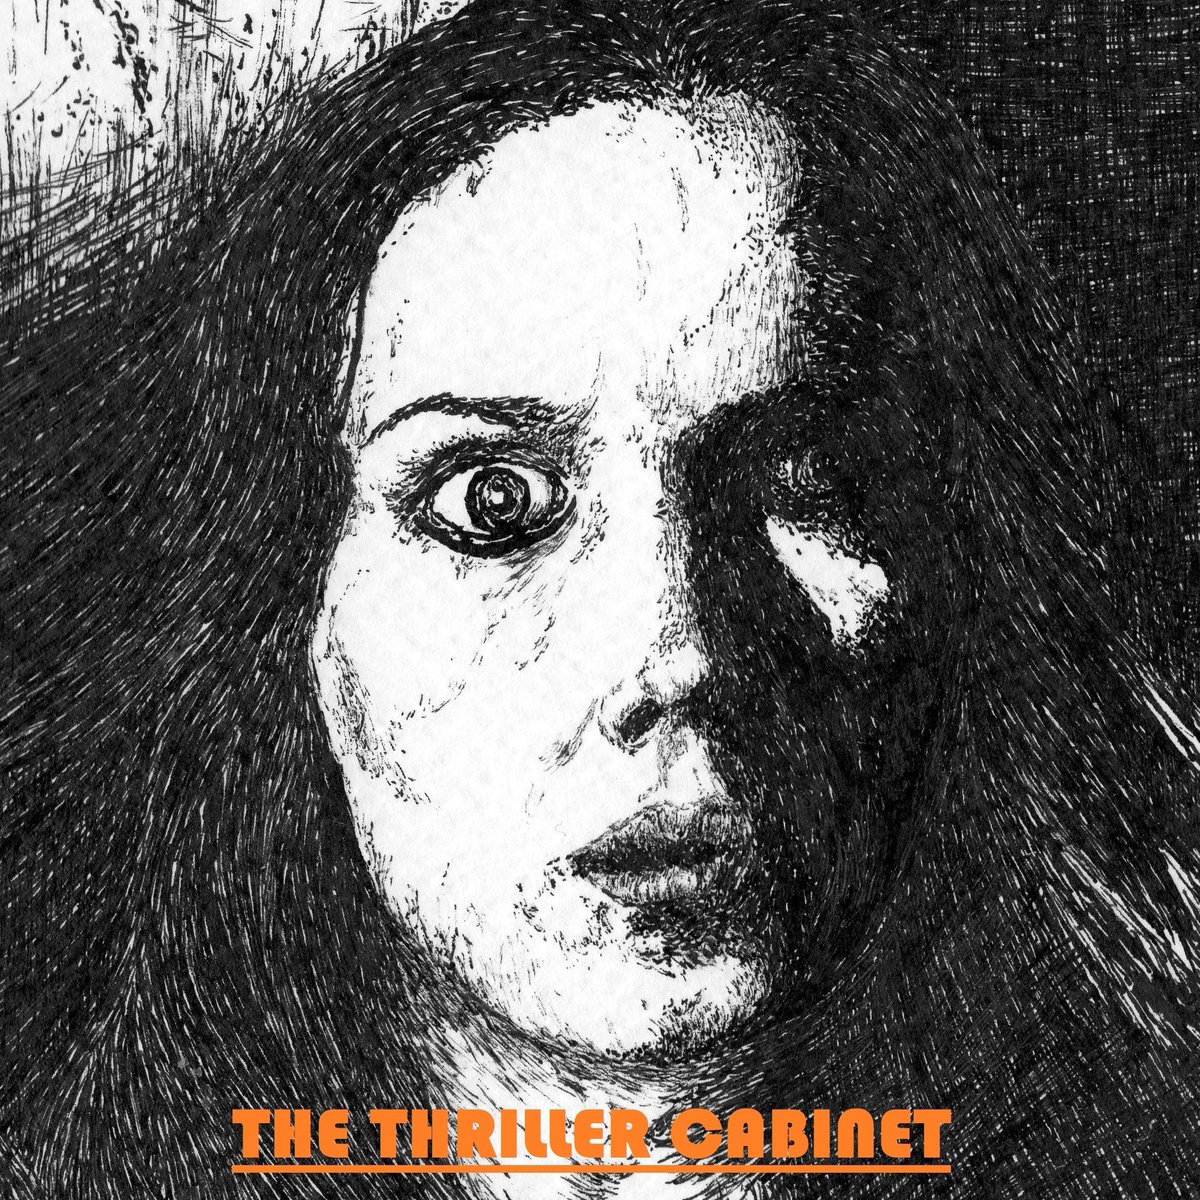 On this month's episode of The Thriller Cabinet podcast, @nutellanate joins me to pick three OVERLOOKED GIALLO FILMS. Black hat, gloves and murder weapon of choice not necessarily required...Available on Spotify, Apple, Amazon etc.